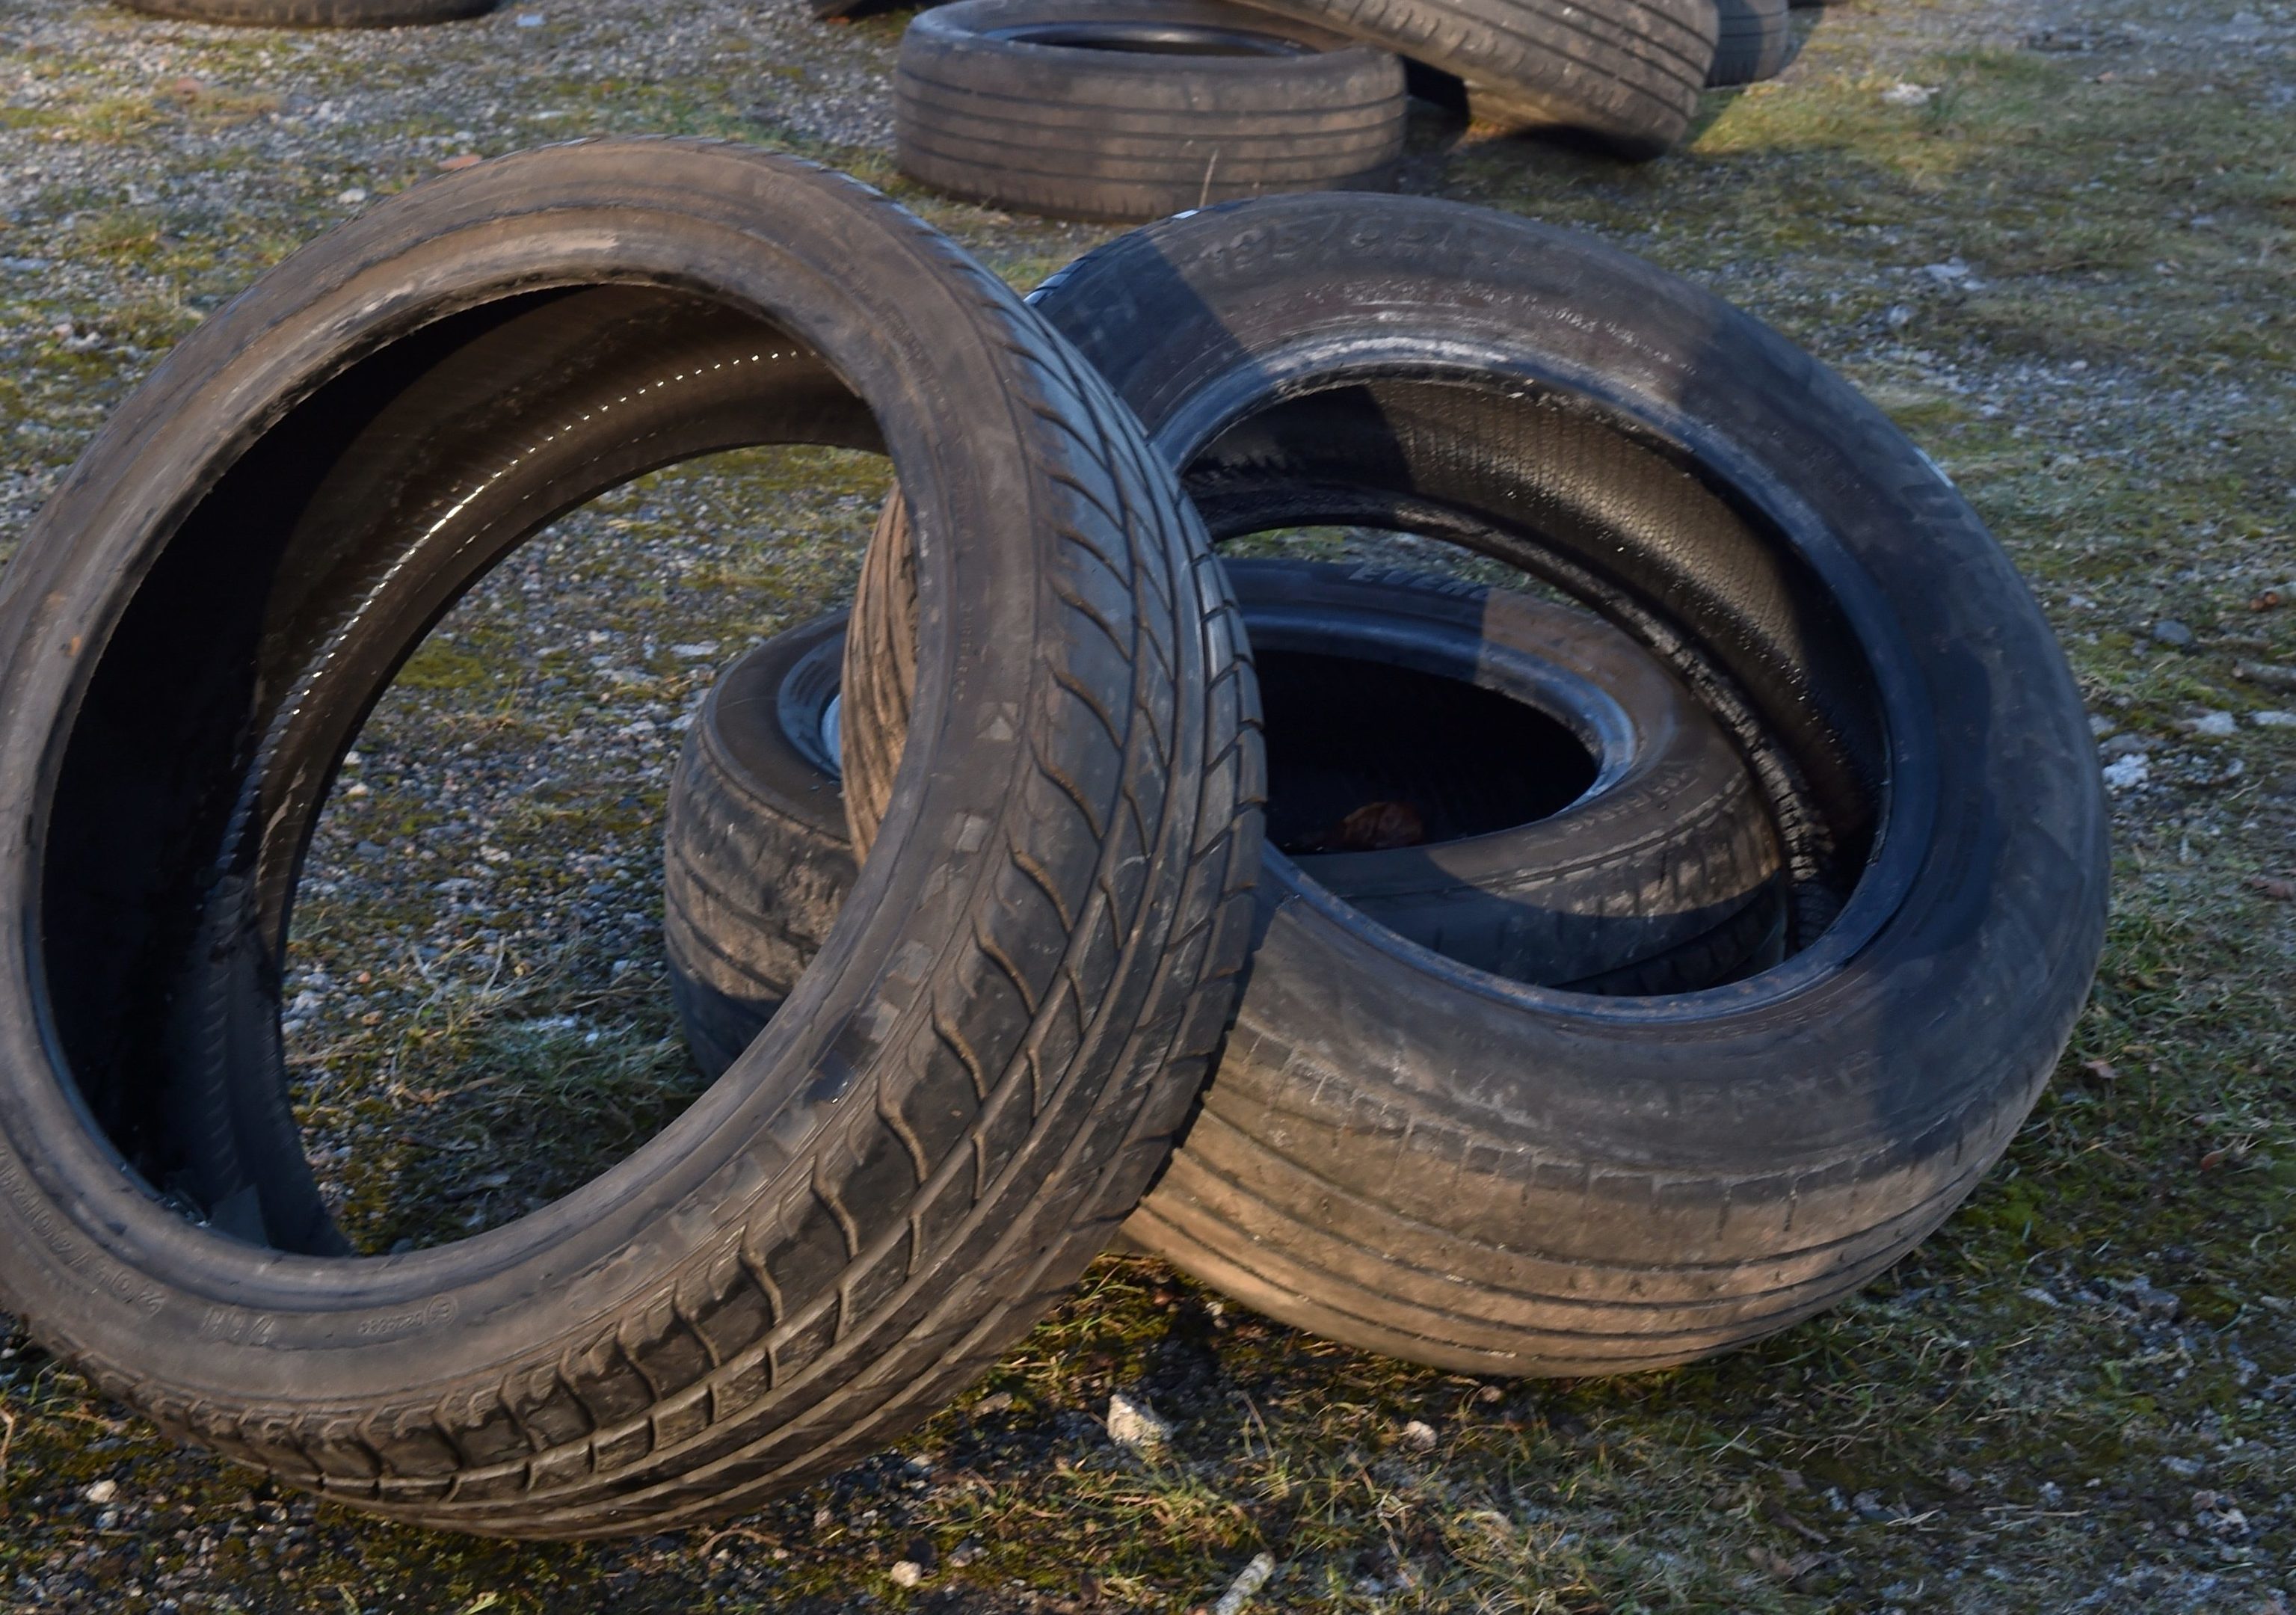 Newhills Church - Lots of tyres have been dumped at the church car park.
Picture by COLIN RENNIE  January 19, 2018.